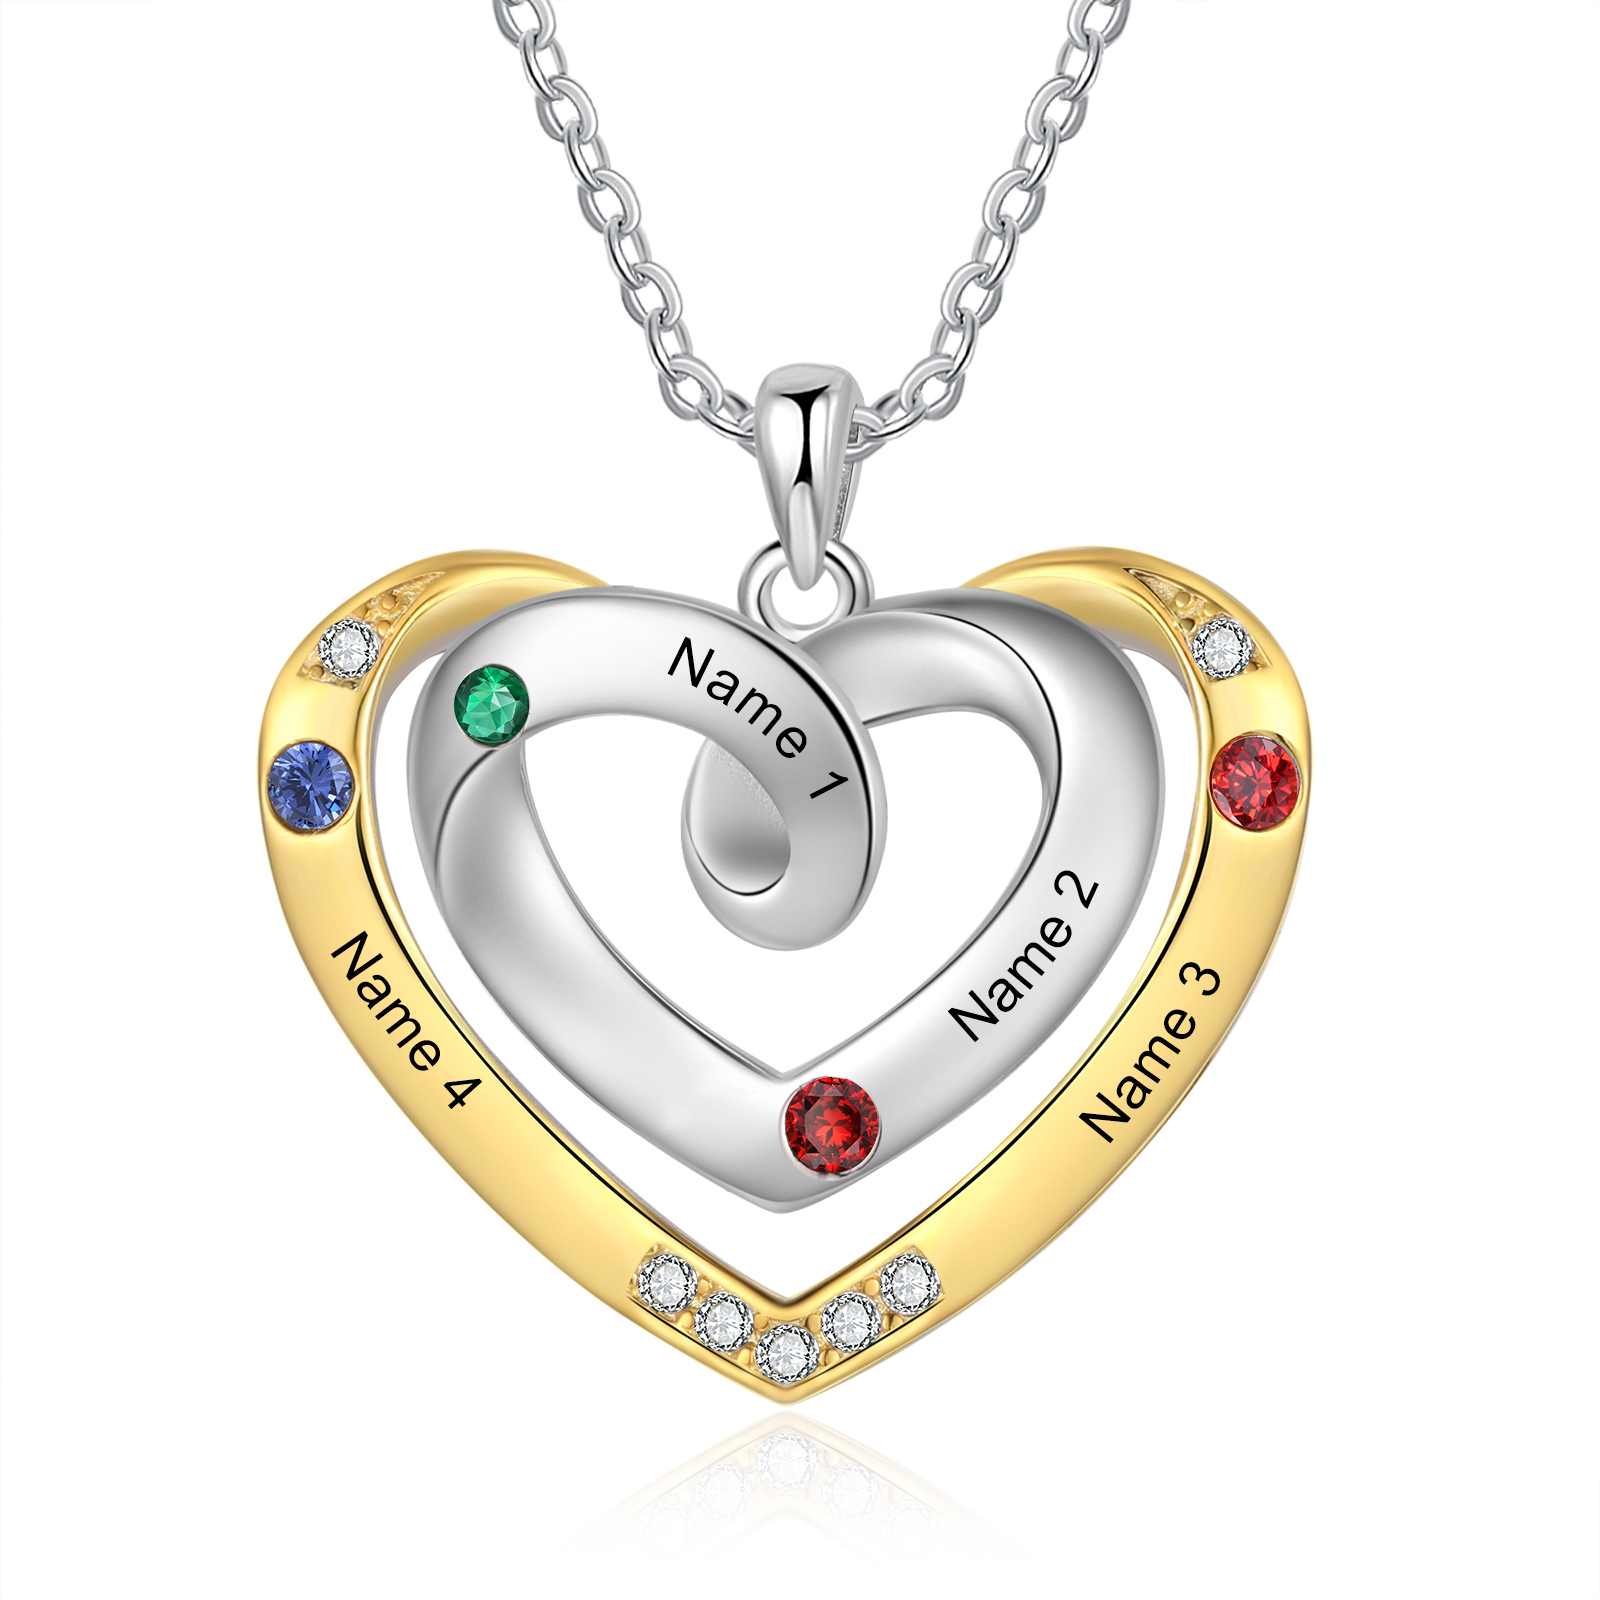 4 Names - Personalized Heart Necklace with Customized Names and Birthstone, A Perfect and Exquisite Gift for Her